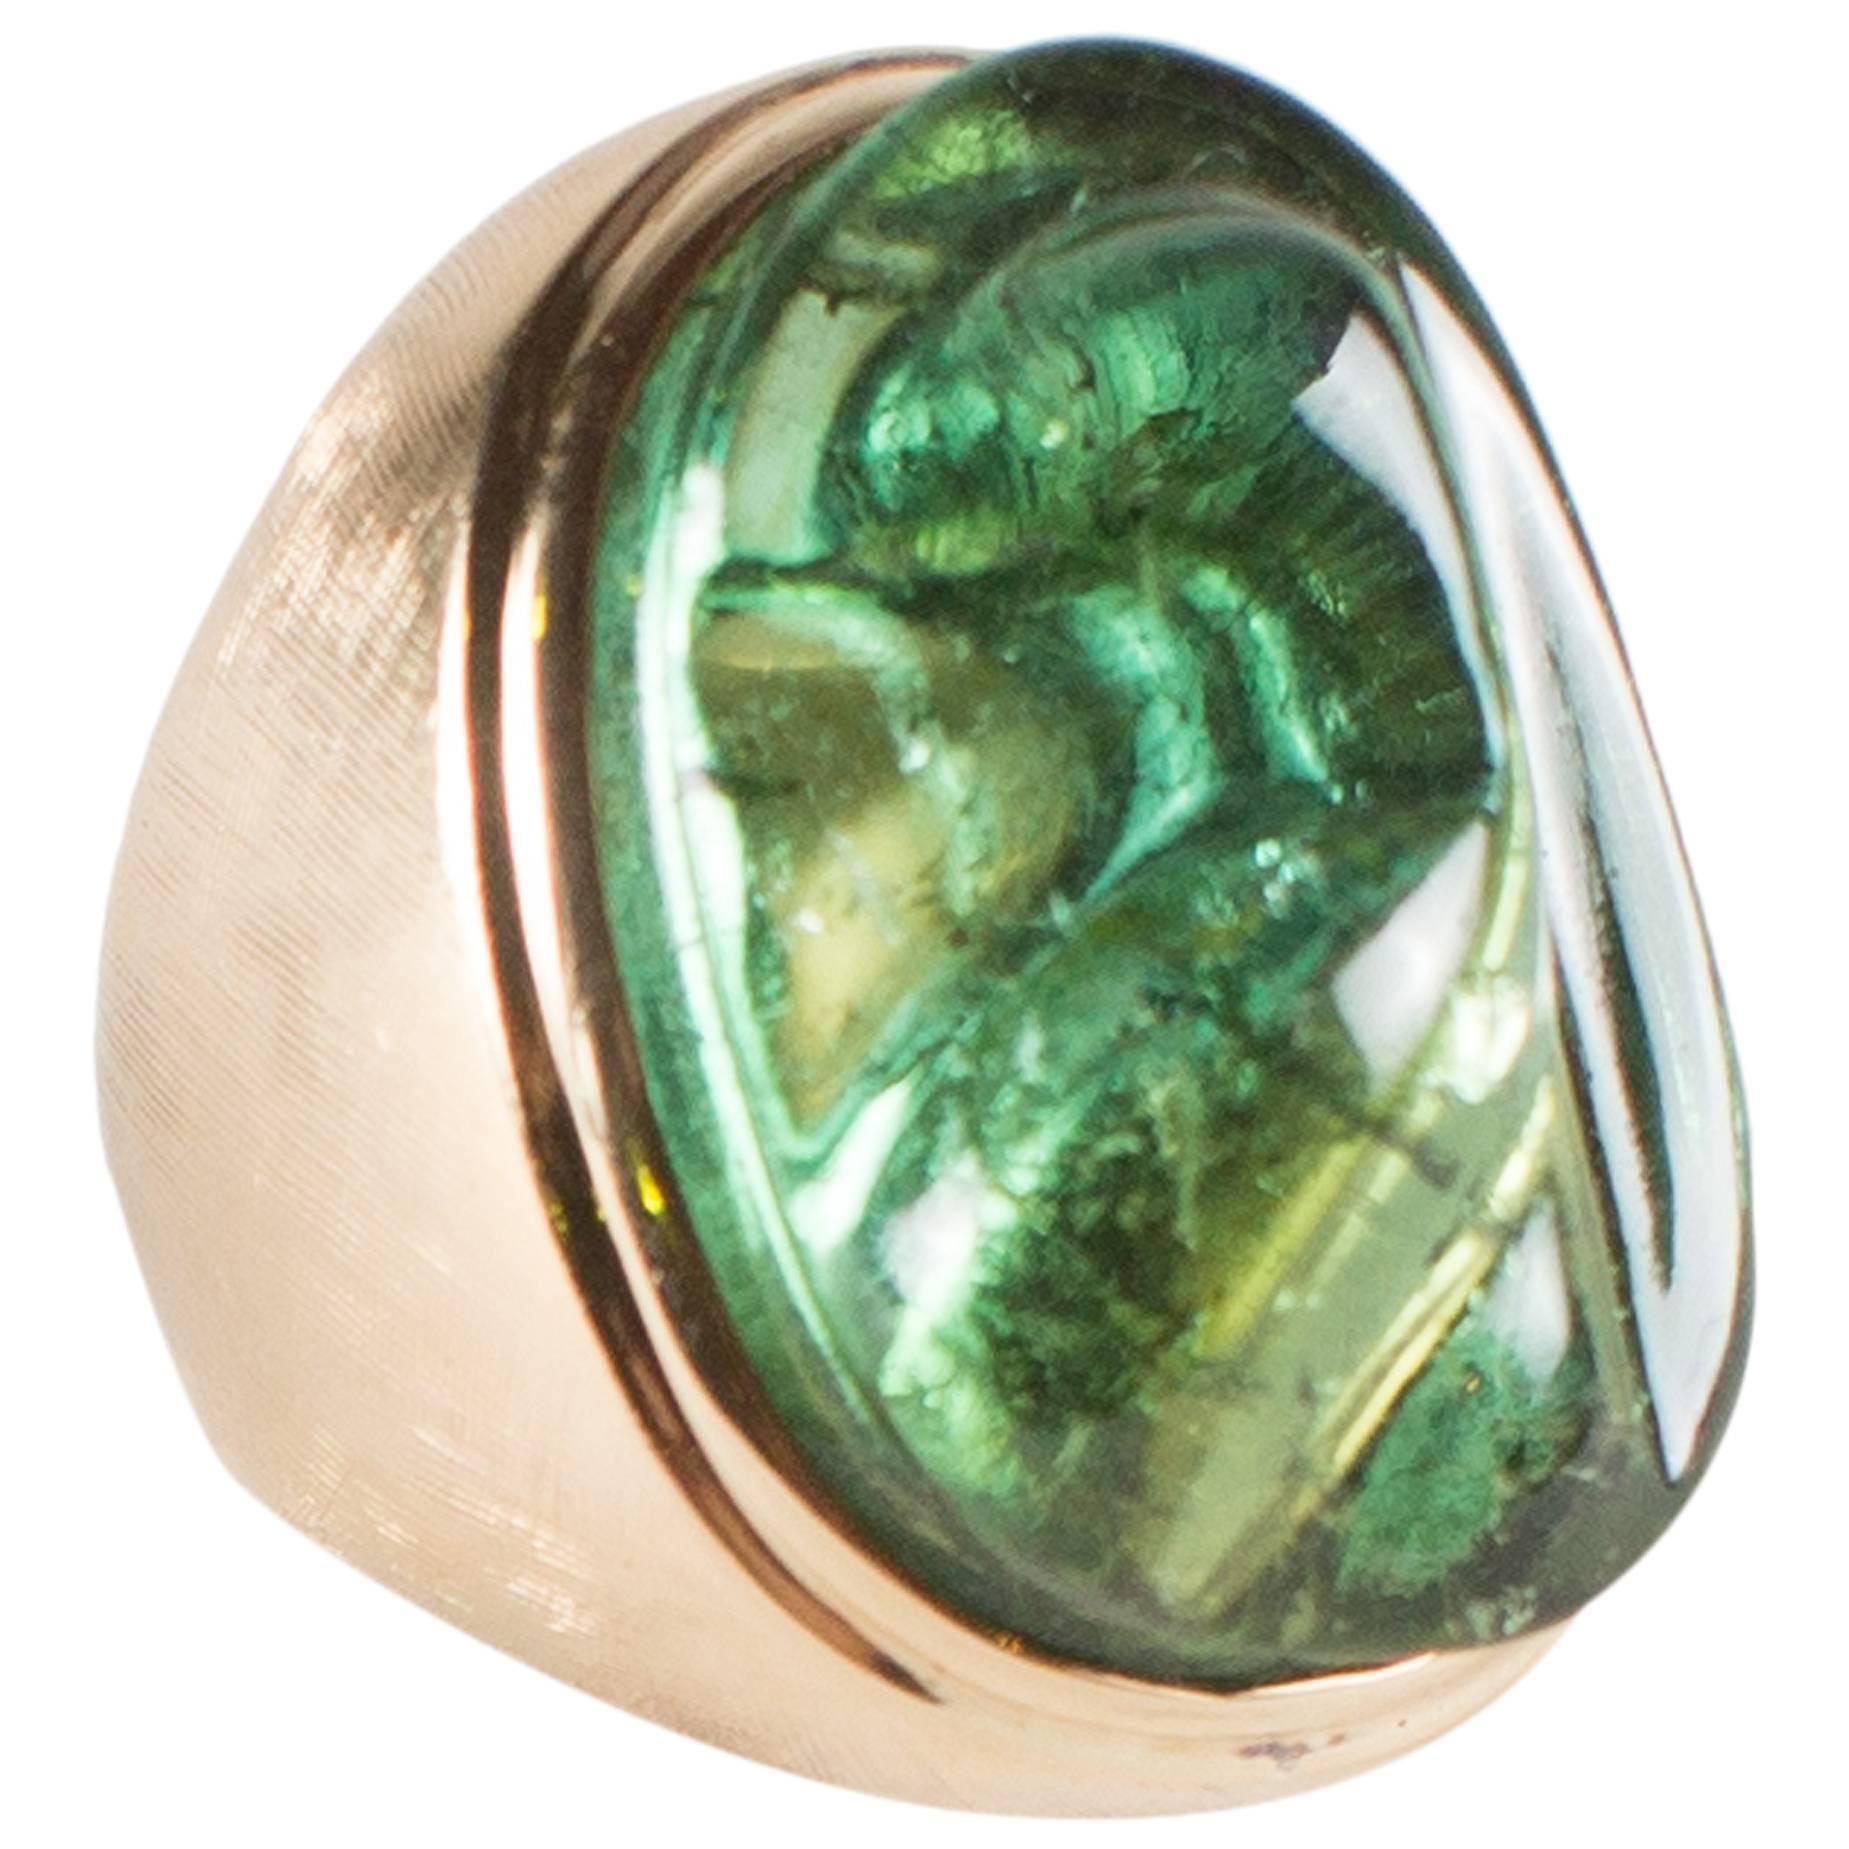  Burle Marx Yellow Gold and Sculpted Green Tourmaline Ring